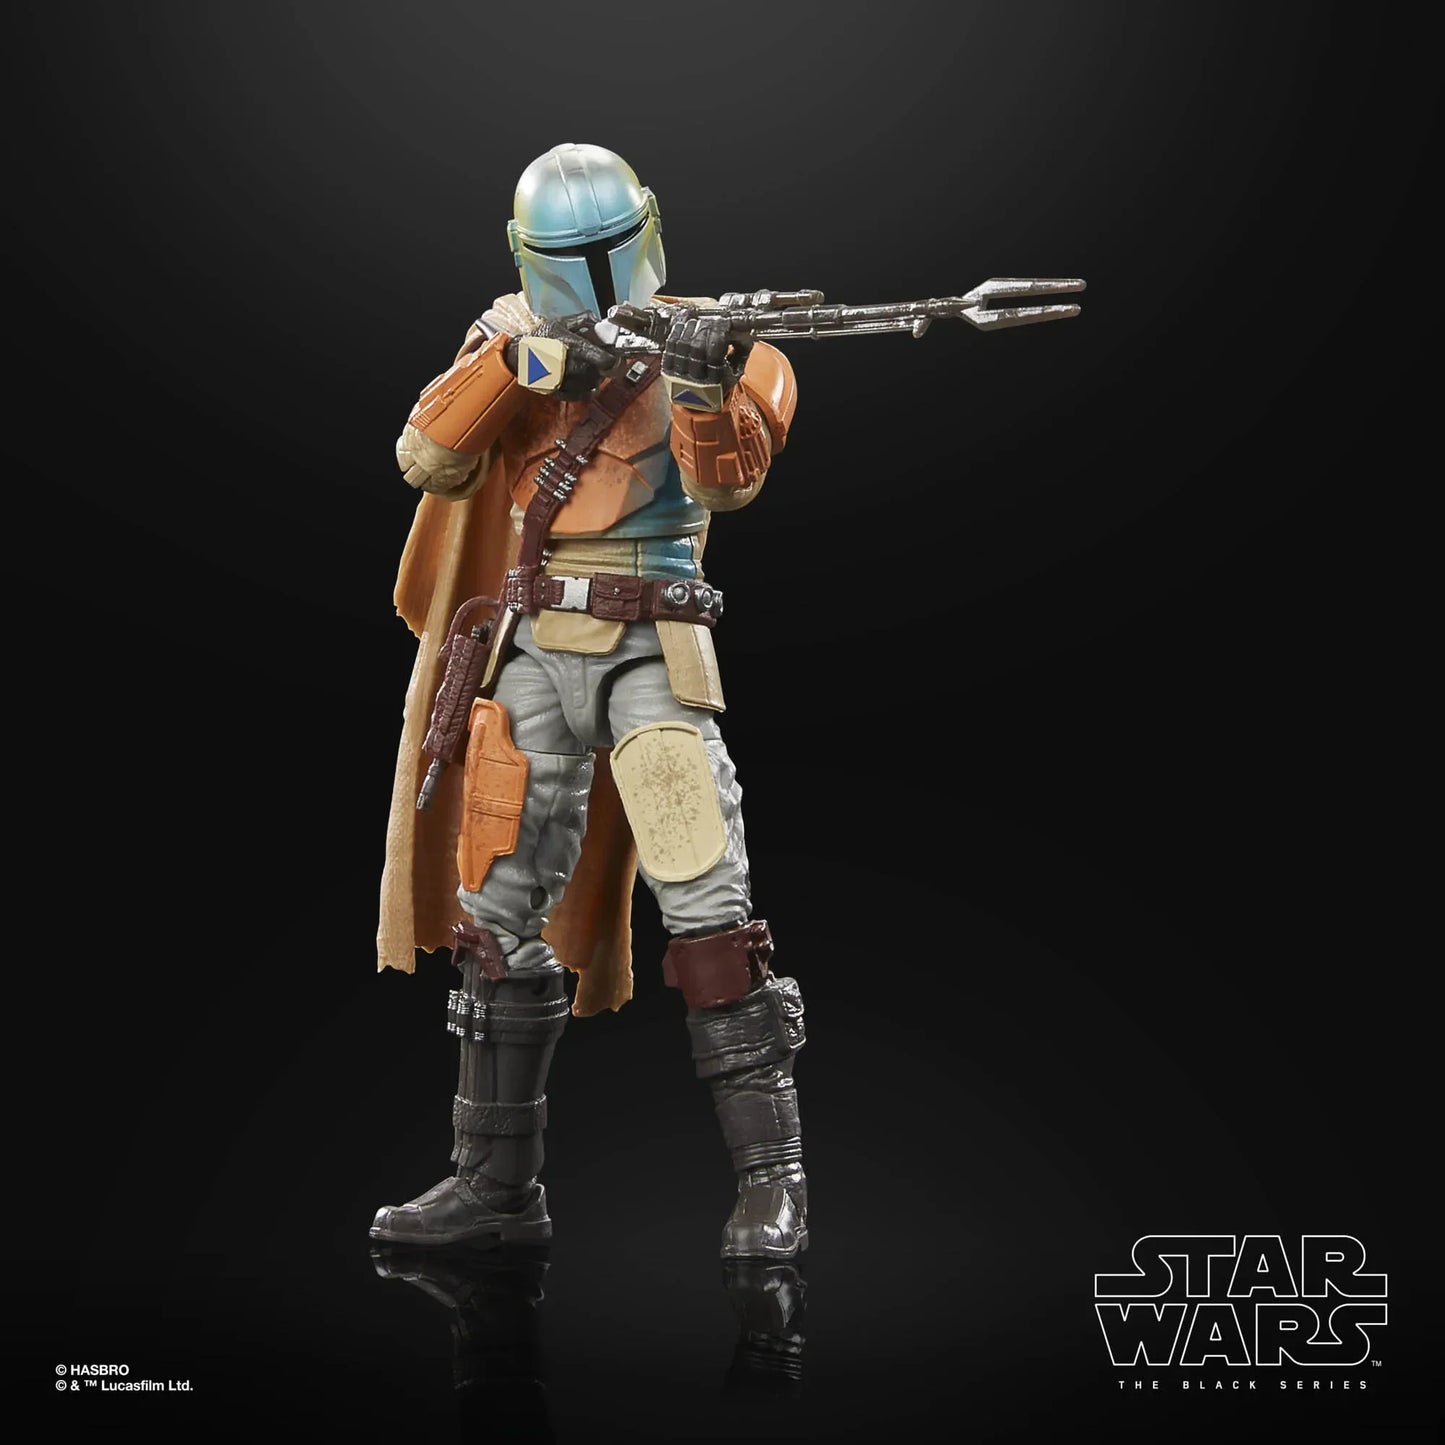 6 Inches Star Wars Figure Kenner Retro The Mandalorian Tatooine Action Figures Collect Model Desktop Decor Toy Adult Kid Gift